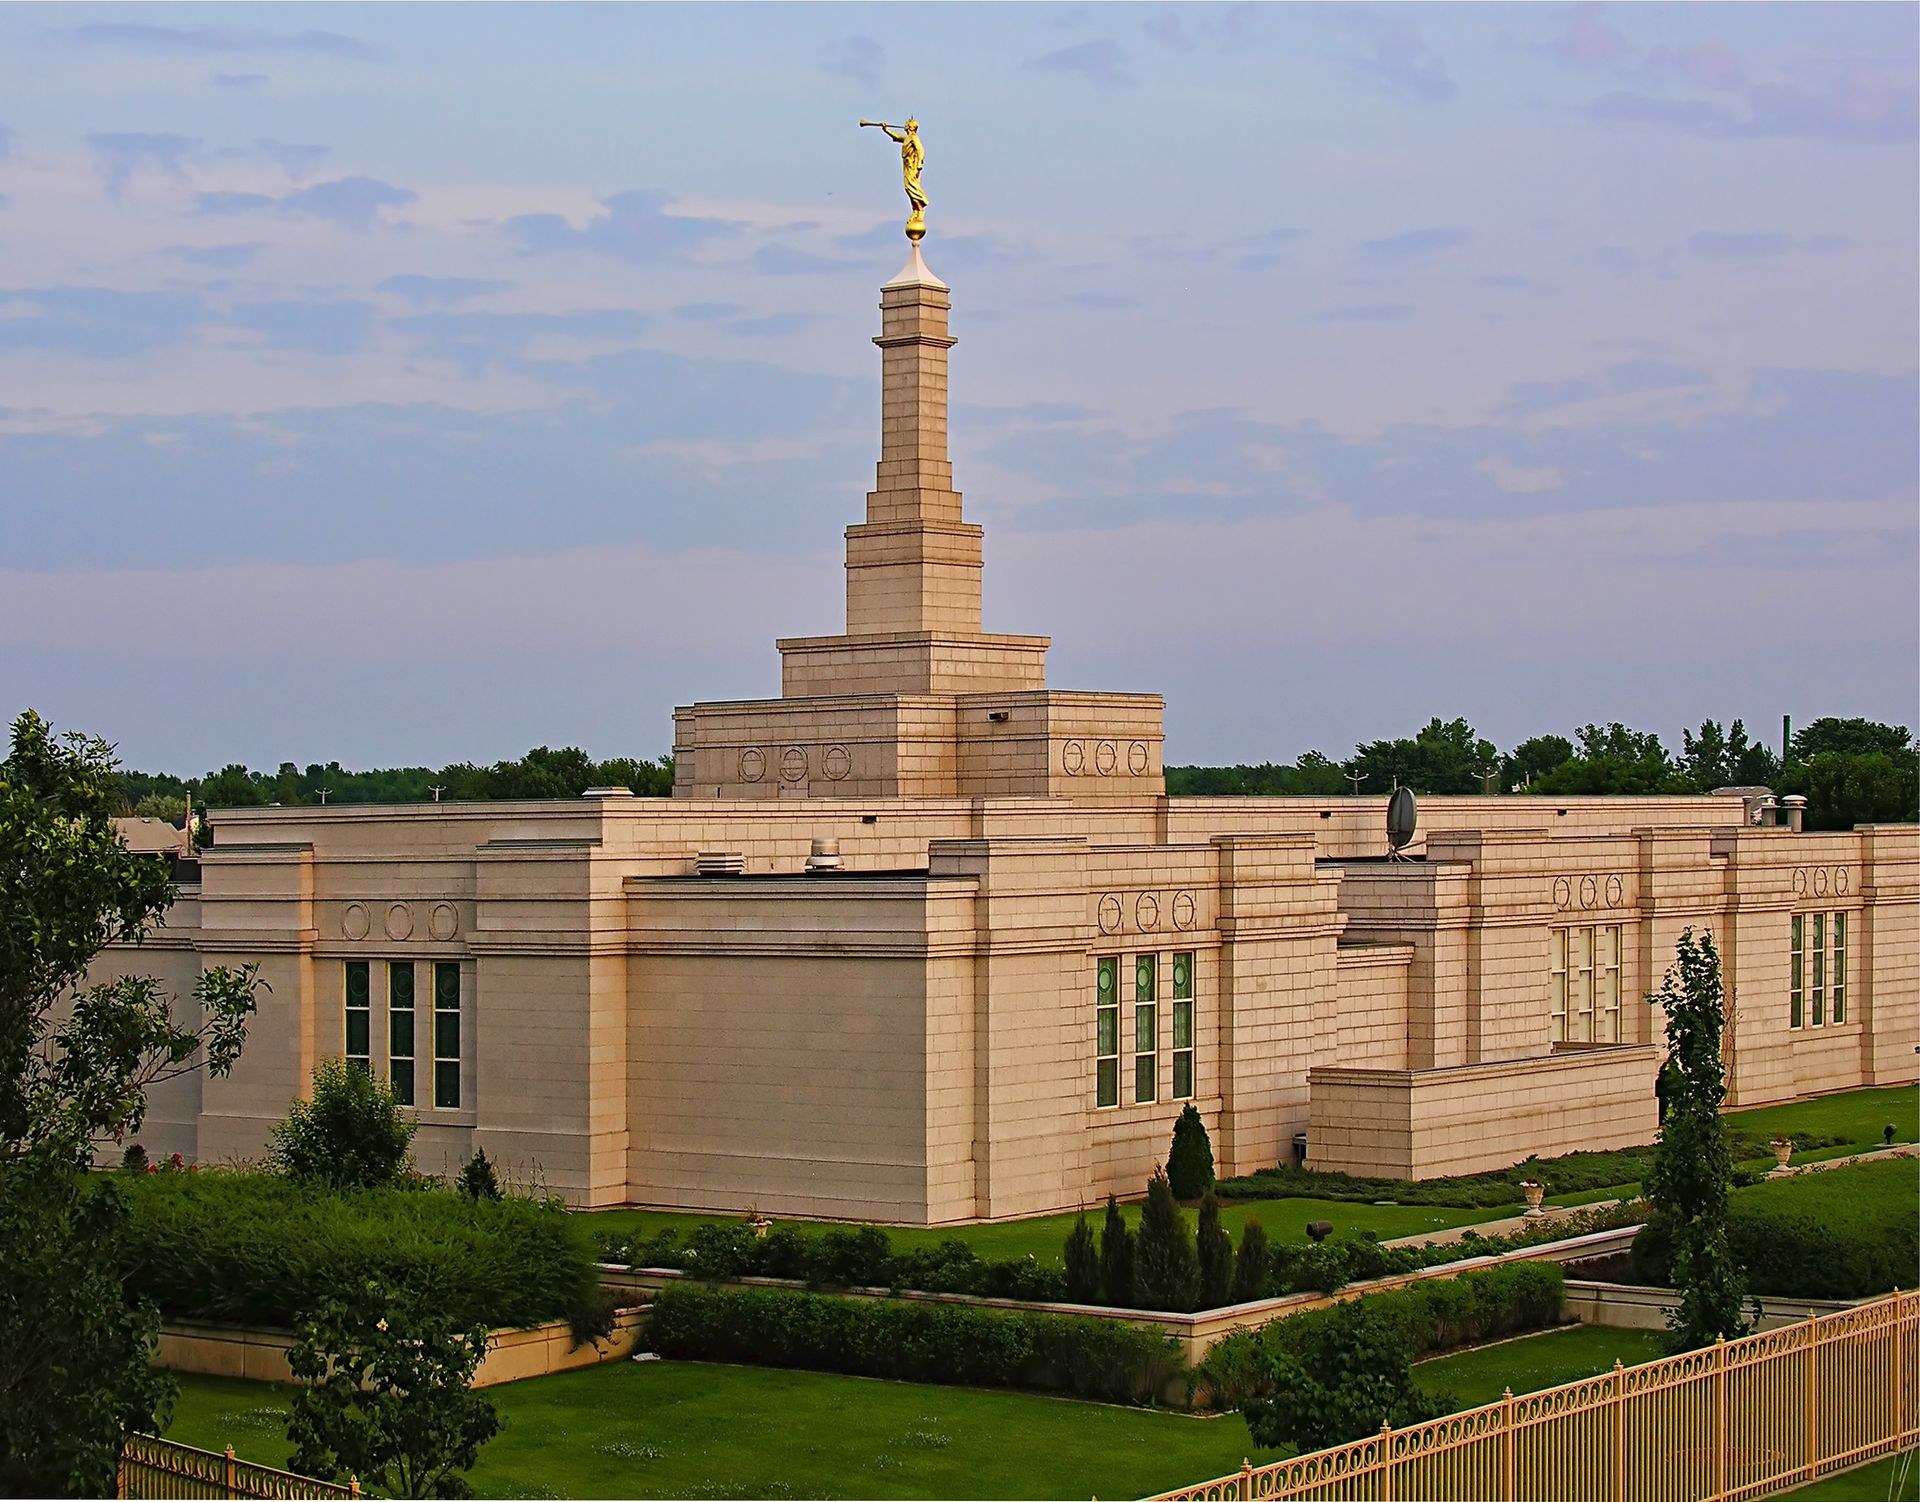 The Montreal Quebec Temple side view, including scenery.